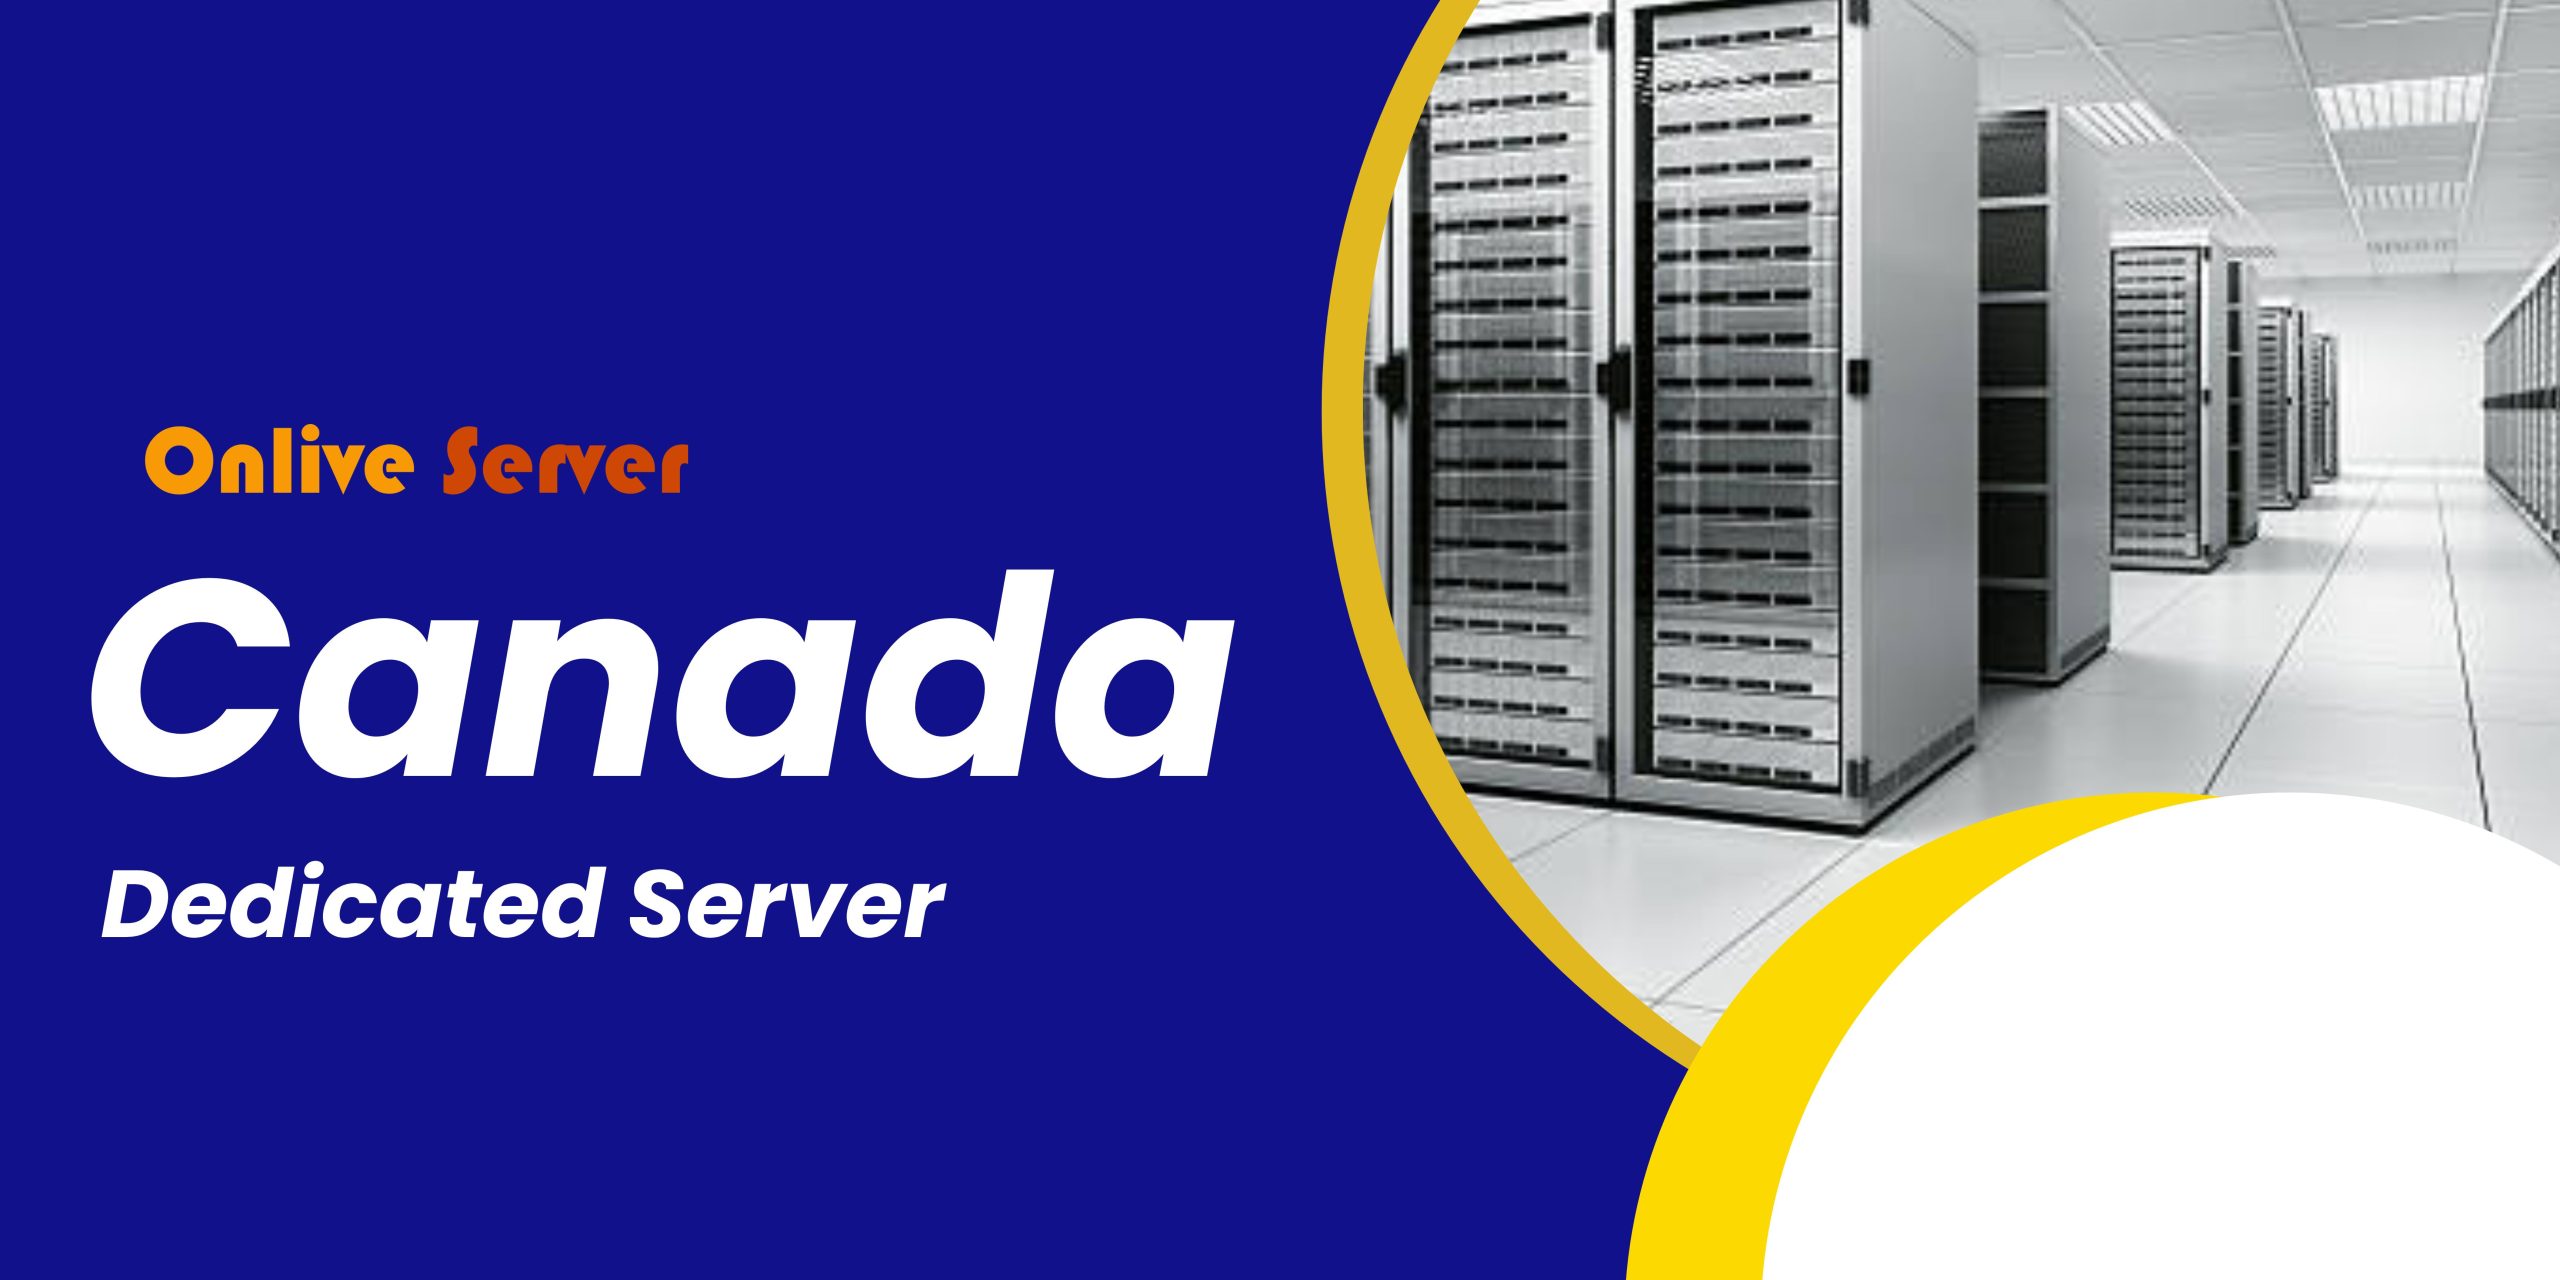 Choose Reliable Canada Dedicated Server by Onlive Server for Better Performance